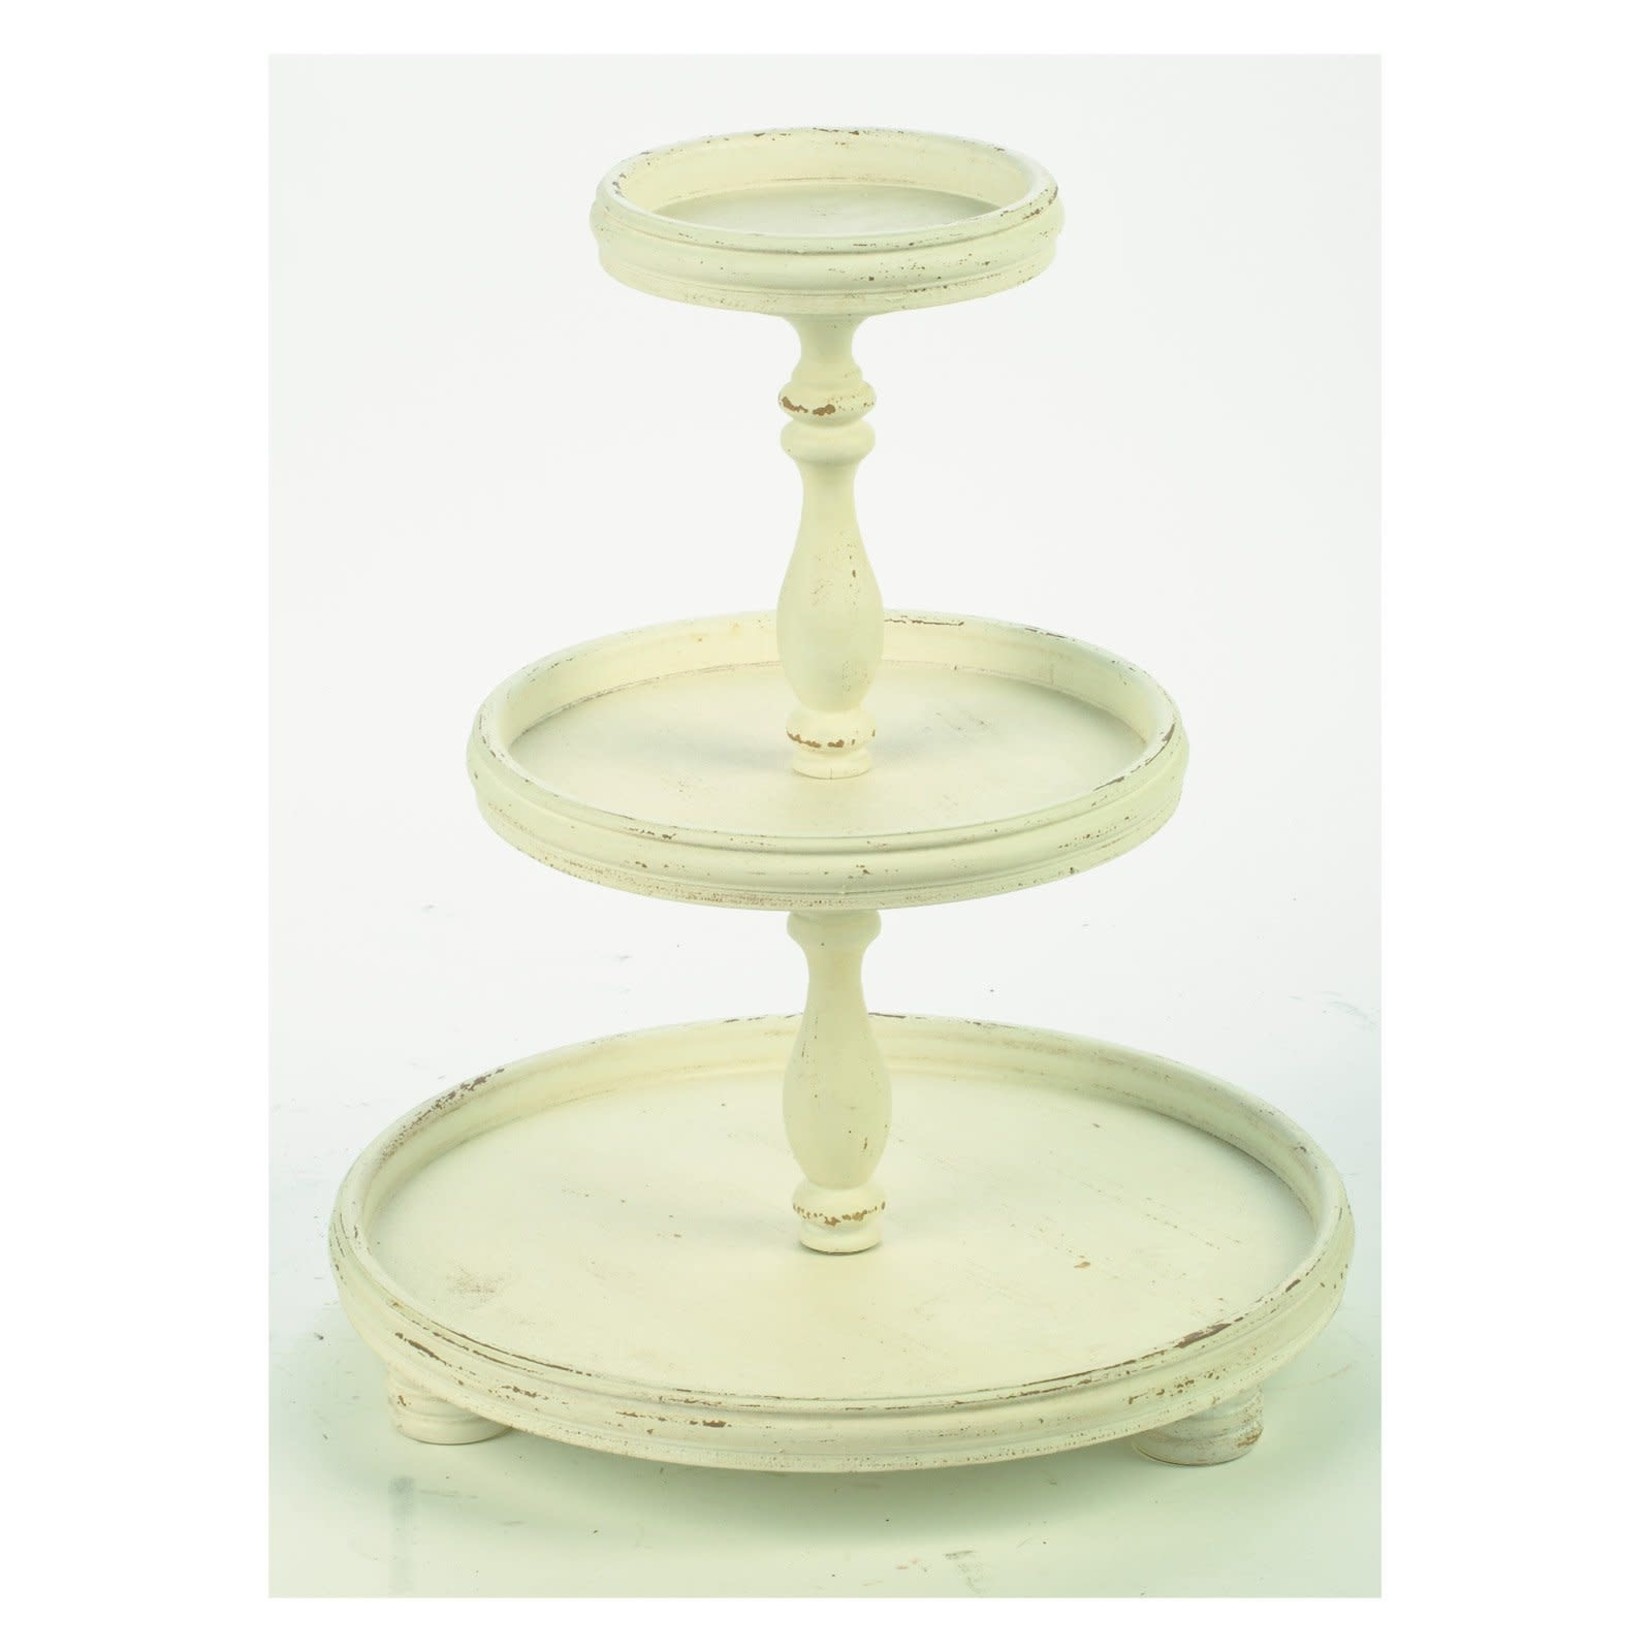 Three Tier Wooden Display Stand - White